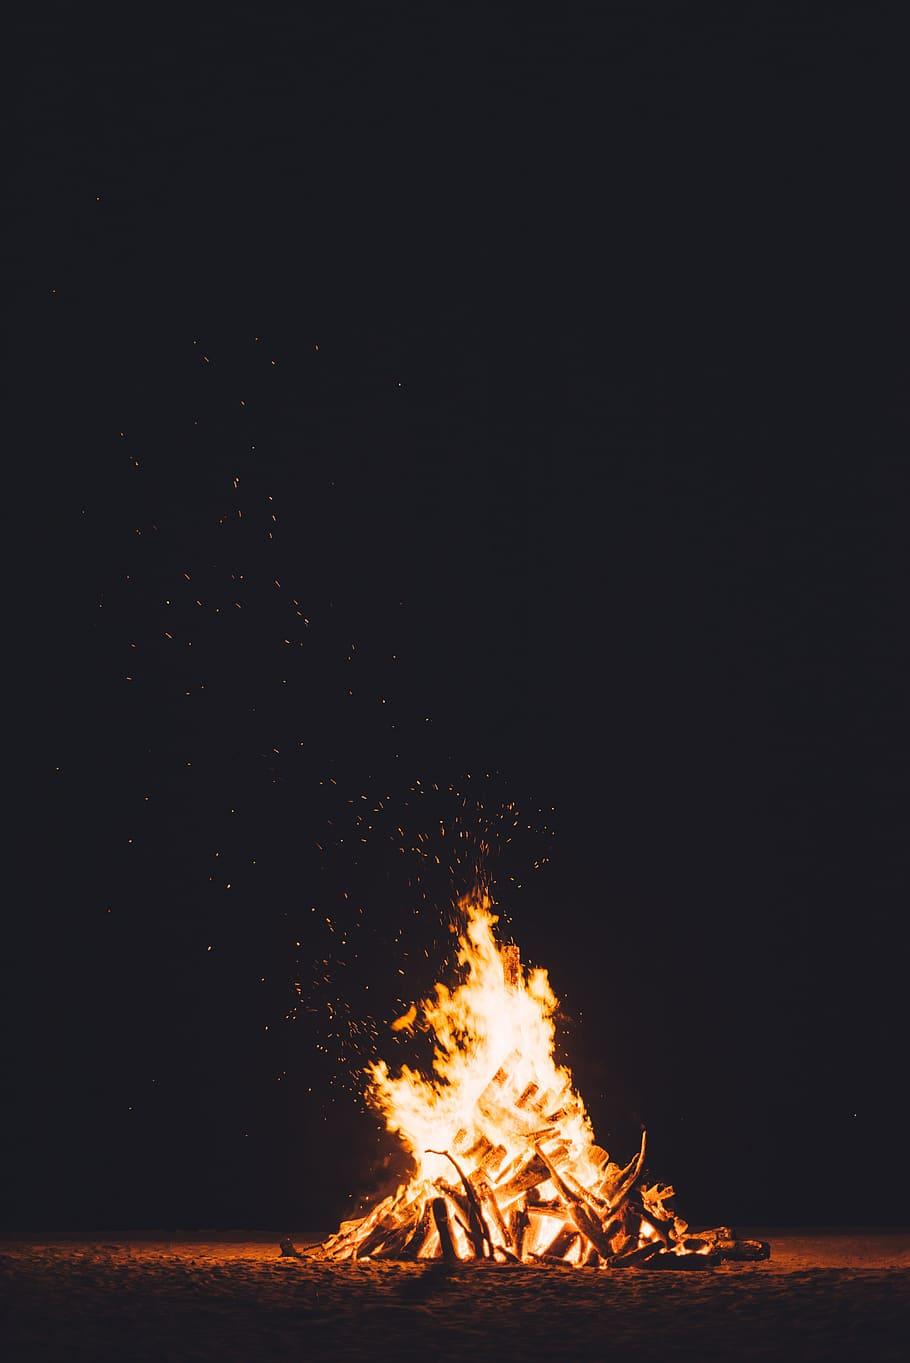 HD wallpaper: photography of burning camp fire, untitled